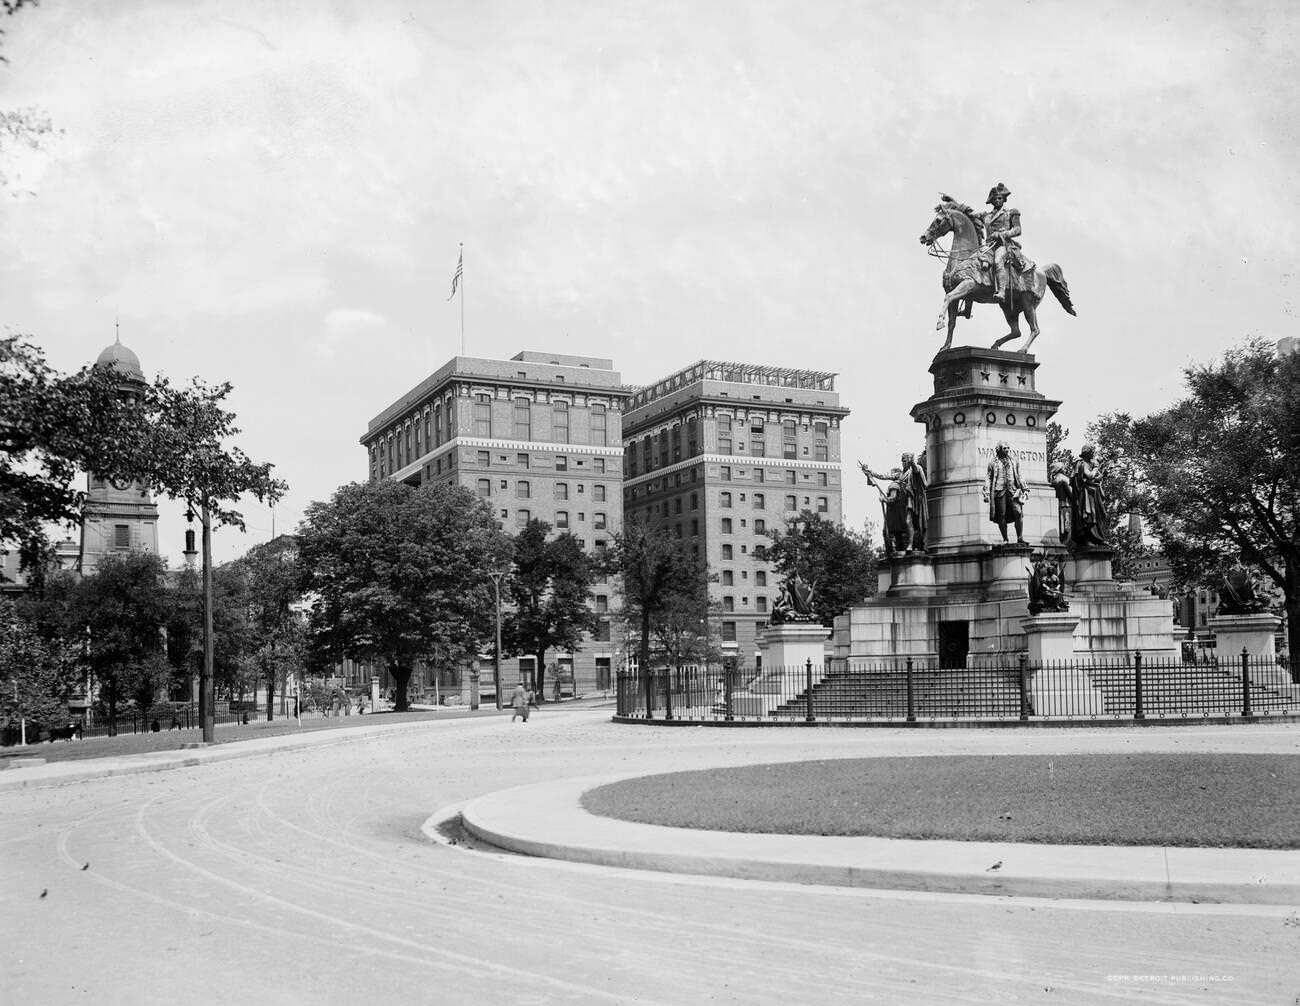 Hotel Richmond from the Capitol, Richmond, 1910s